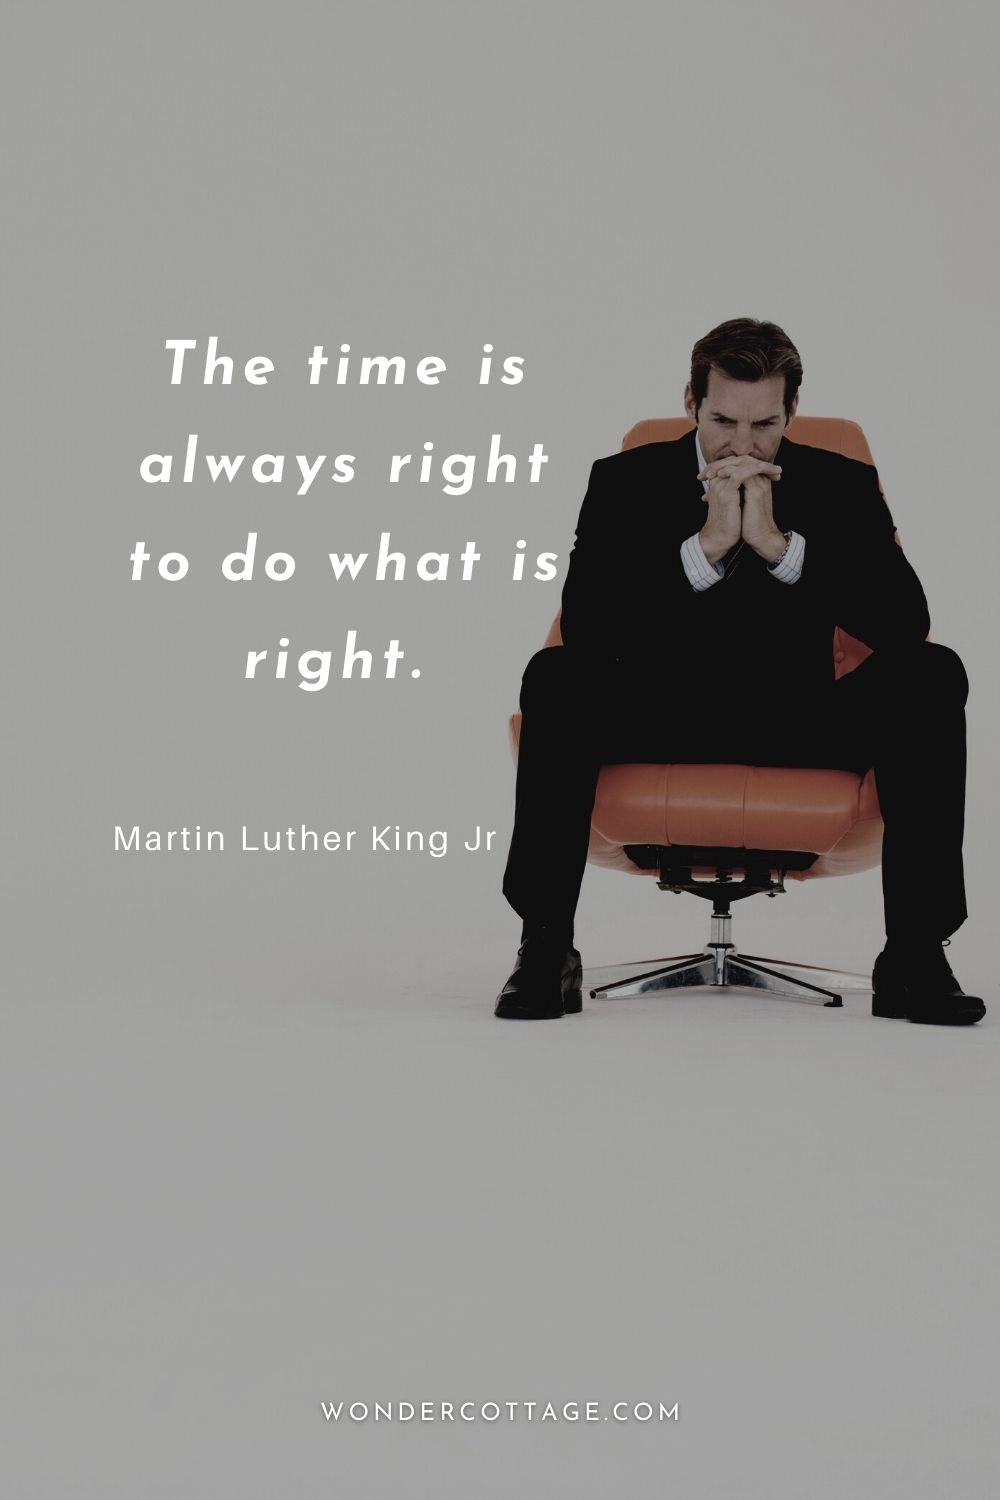 The time is always right to do what is right.  Martin Luther King Jr